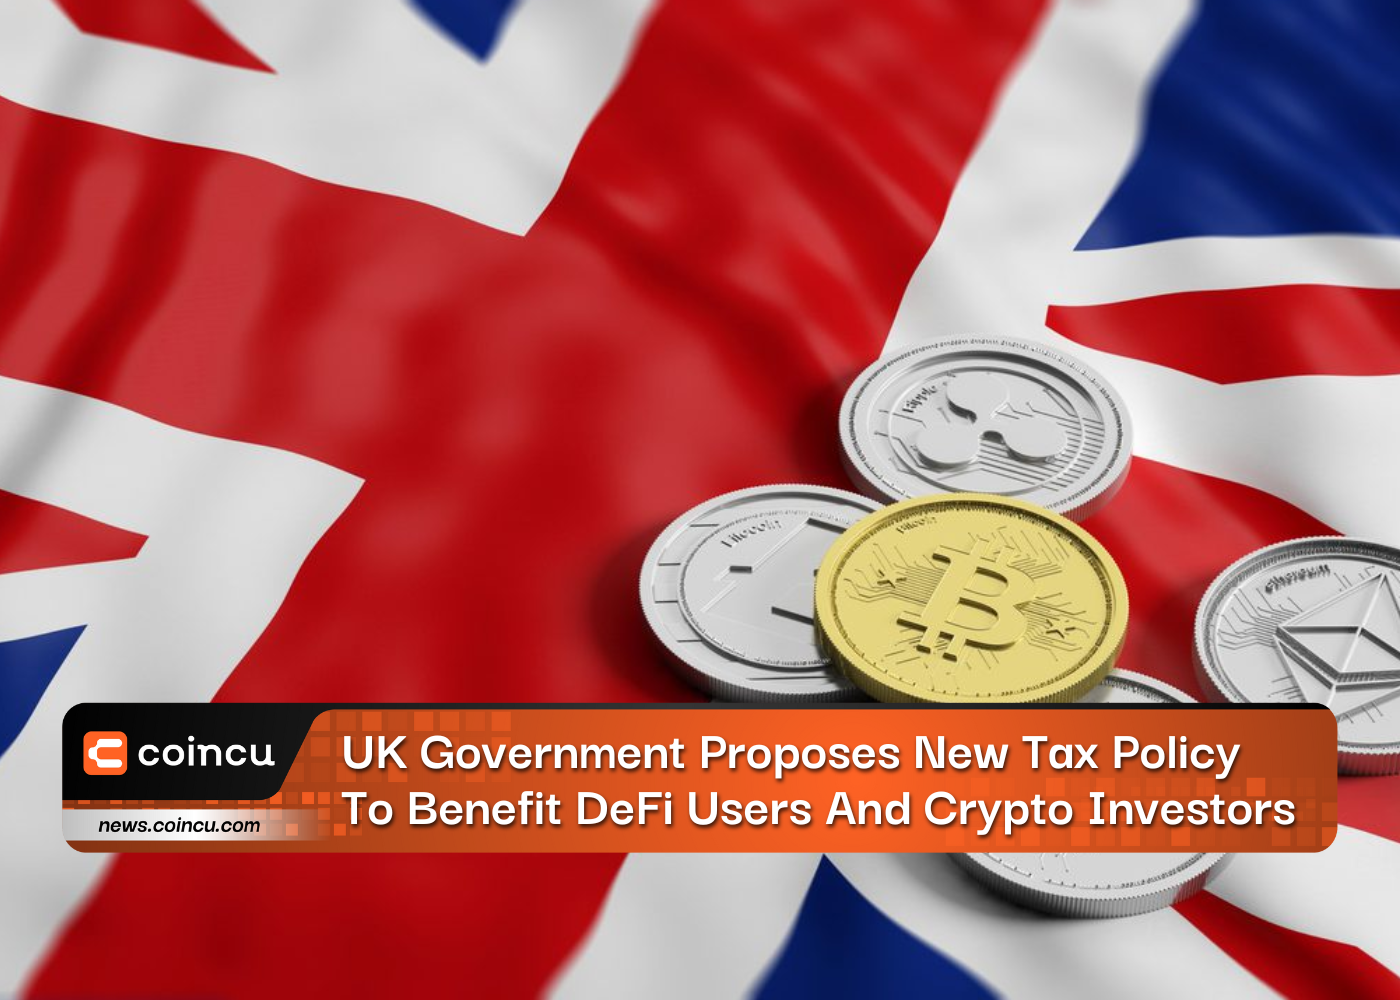 UK Government Proposes New Tax Policy To Benefit DeFi Users And Crypto Investors